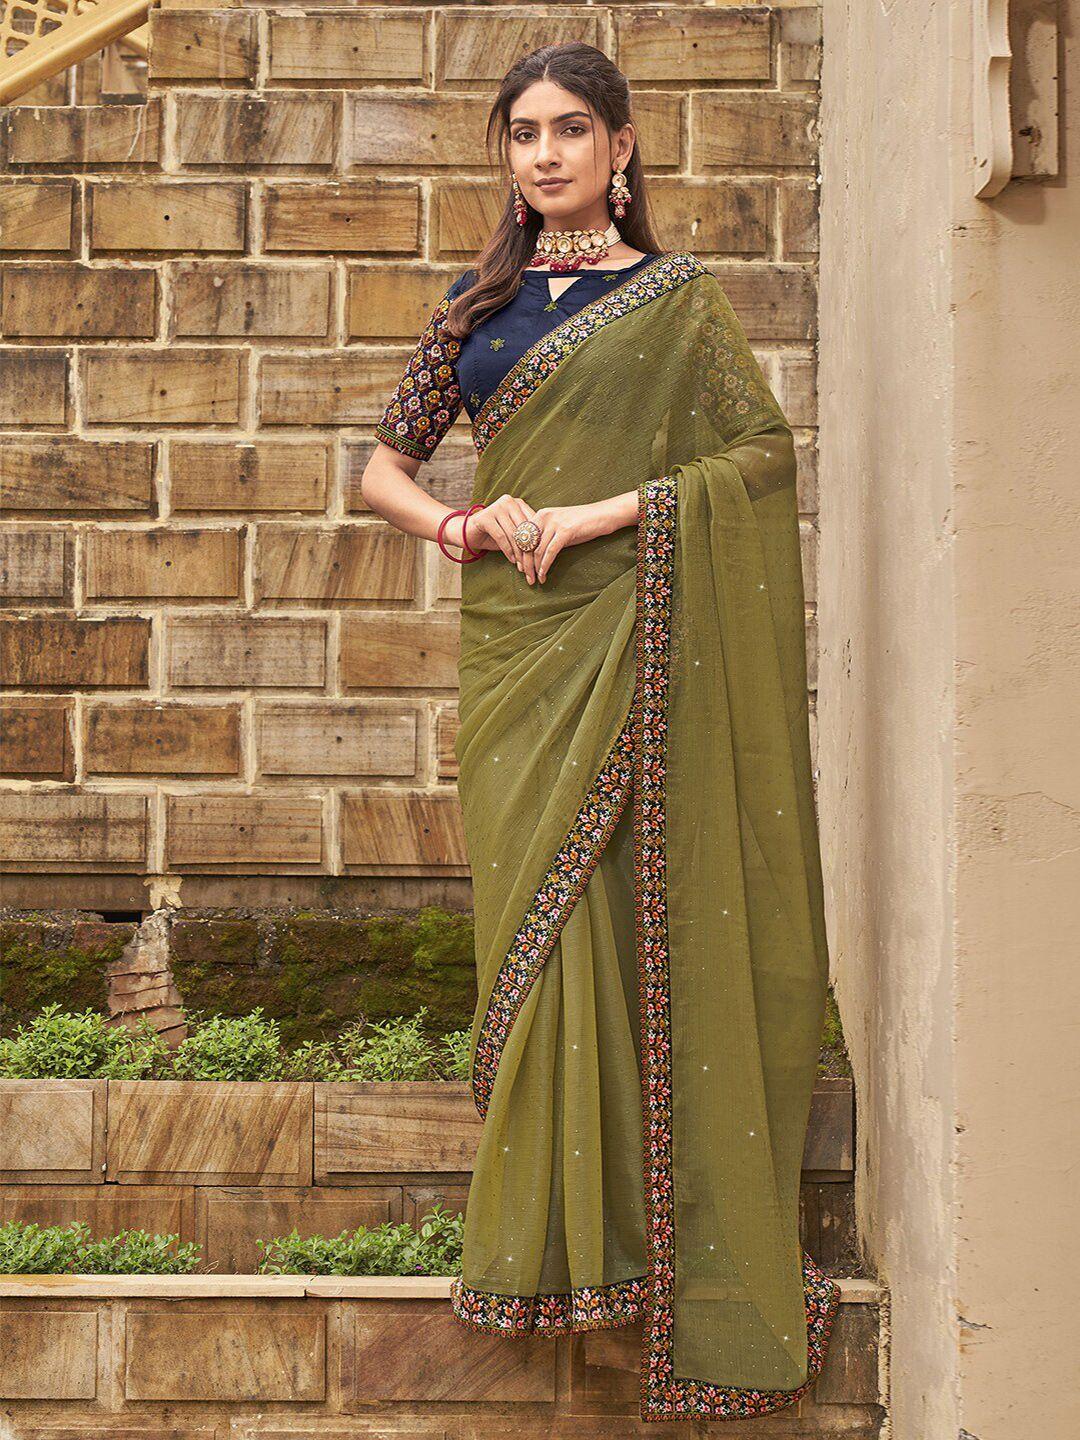 satrani olive green & blue beads and stones embroidered saree